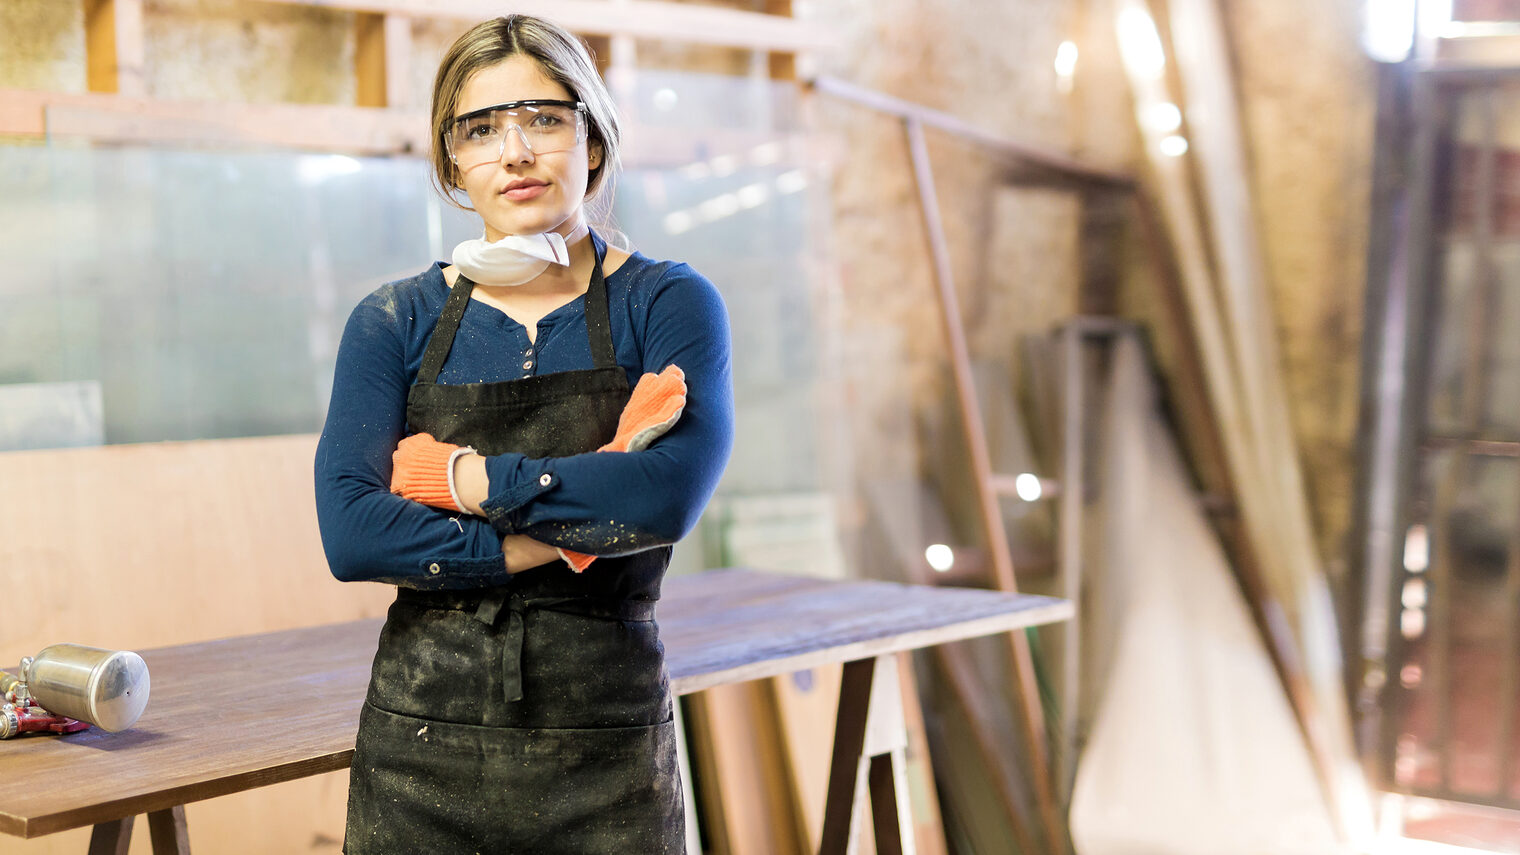 Good looking young confident woman working as carpenter in her own woodshop Schlagwort(e): working, young adult, 20s, equality, gender equality, feminism, carpentry, craft, industry, Latin, Hispanic, female, woman, cute, pretty, beautiful, workshop, woodshop, wood shop, indoor, people, lifestyle, wood, equipment, tool, machine, furniture, worker, carpenter, manual, job, occupation, copy space, copyspace, glasses, protective, gloves, mask, table, varnish, pressure, paint, spray, gun, paint gun, spray gun, arms crossed, eye contact, portrait, woodworking